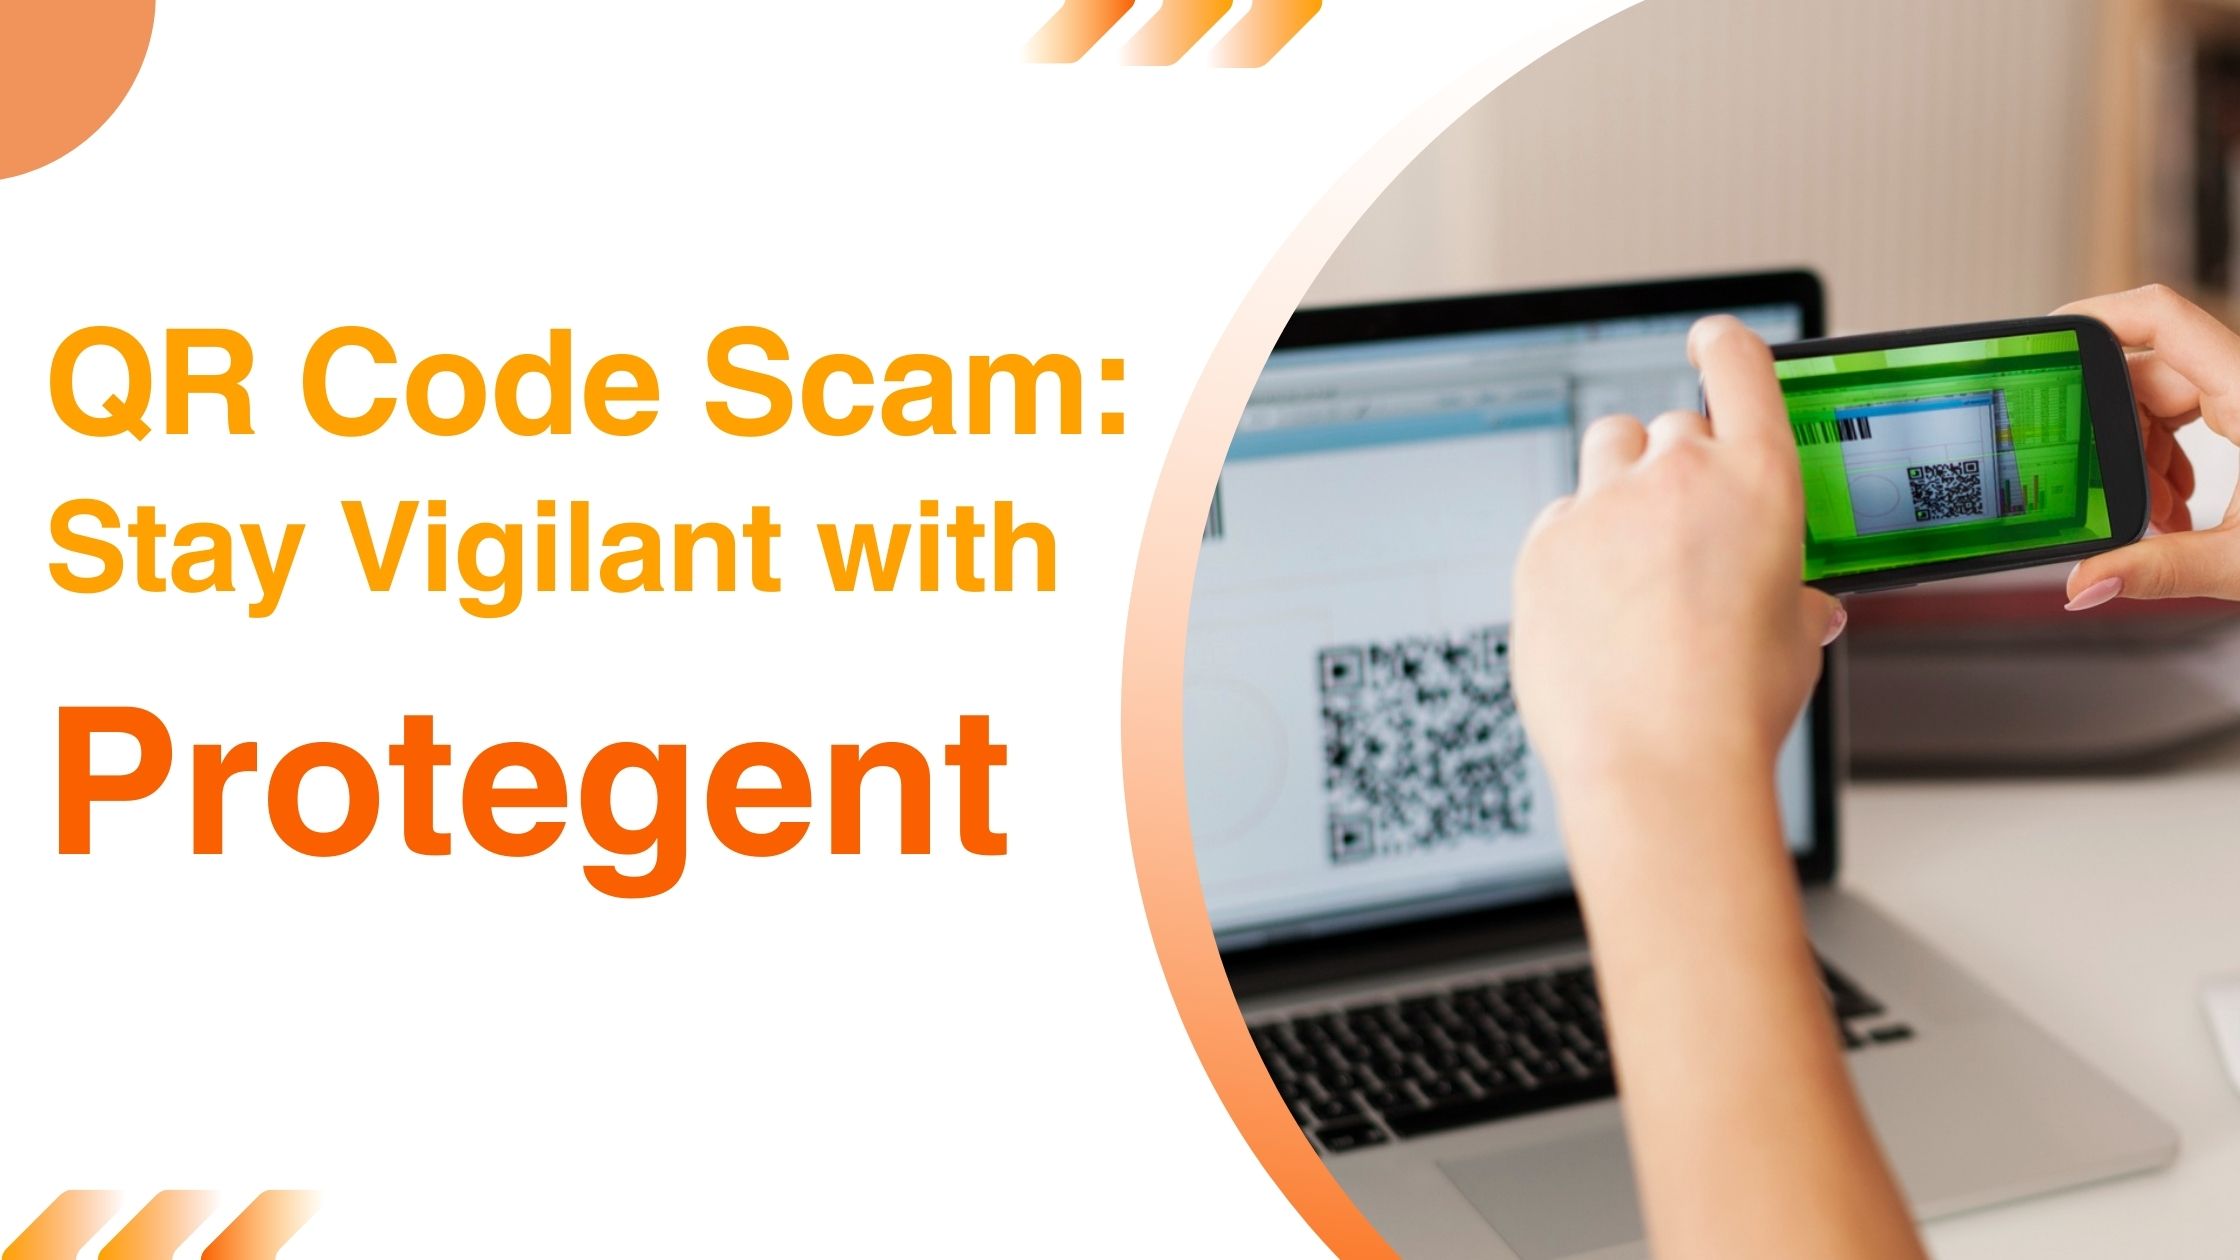 Why you shouldn't scan QR codes in emails